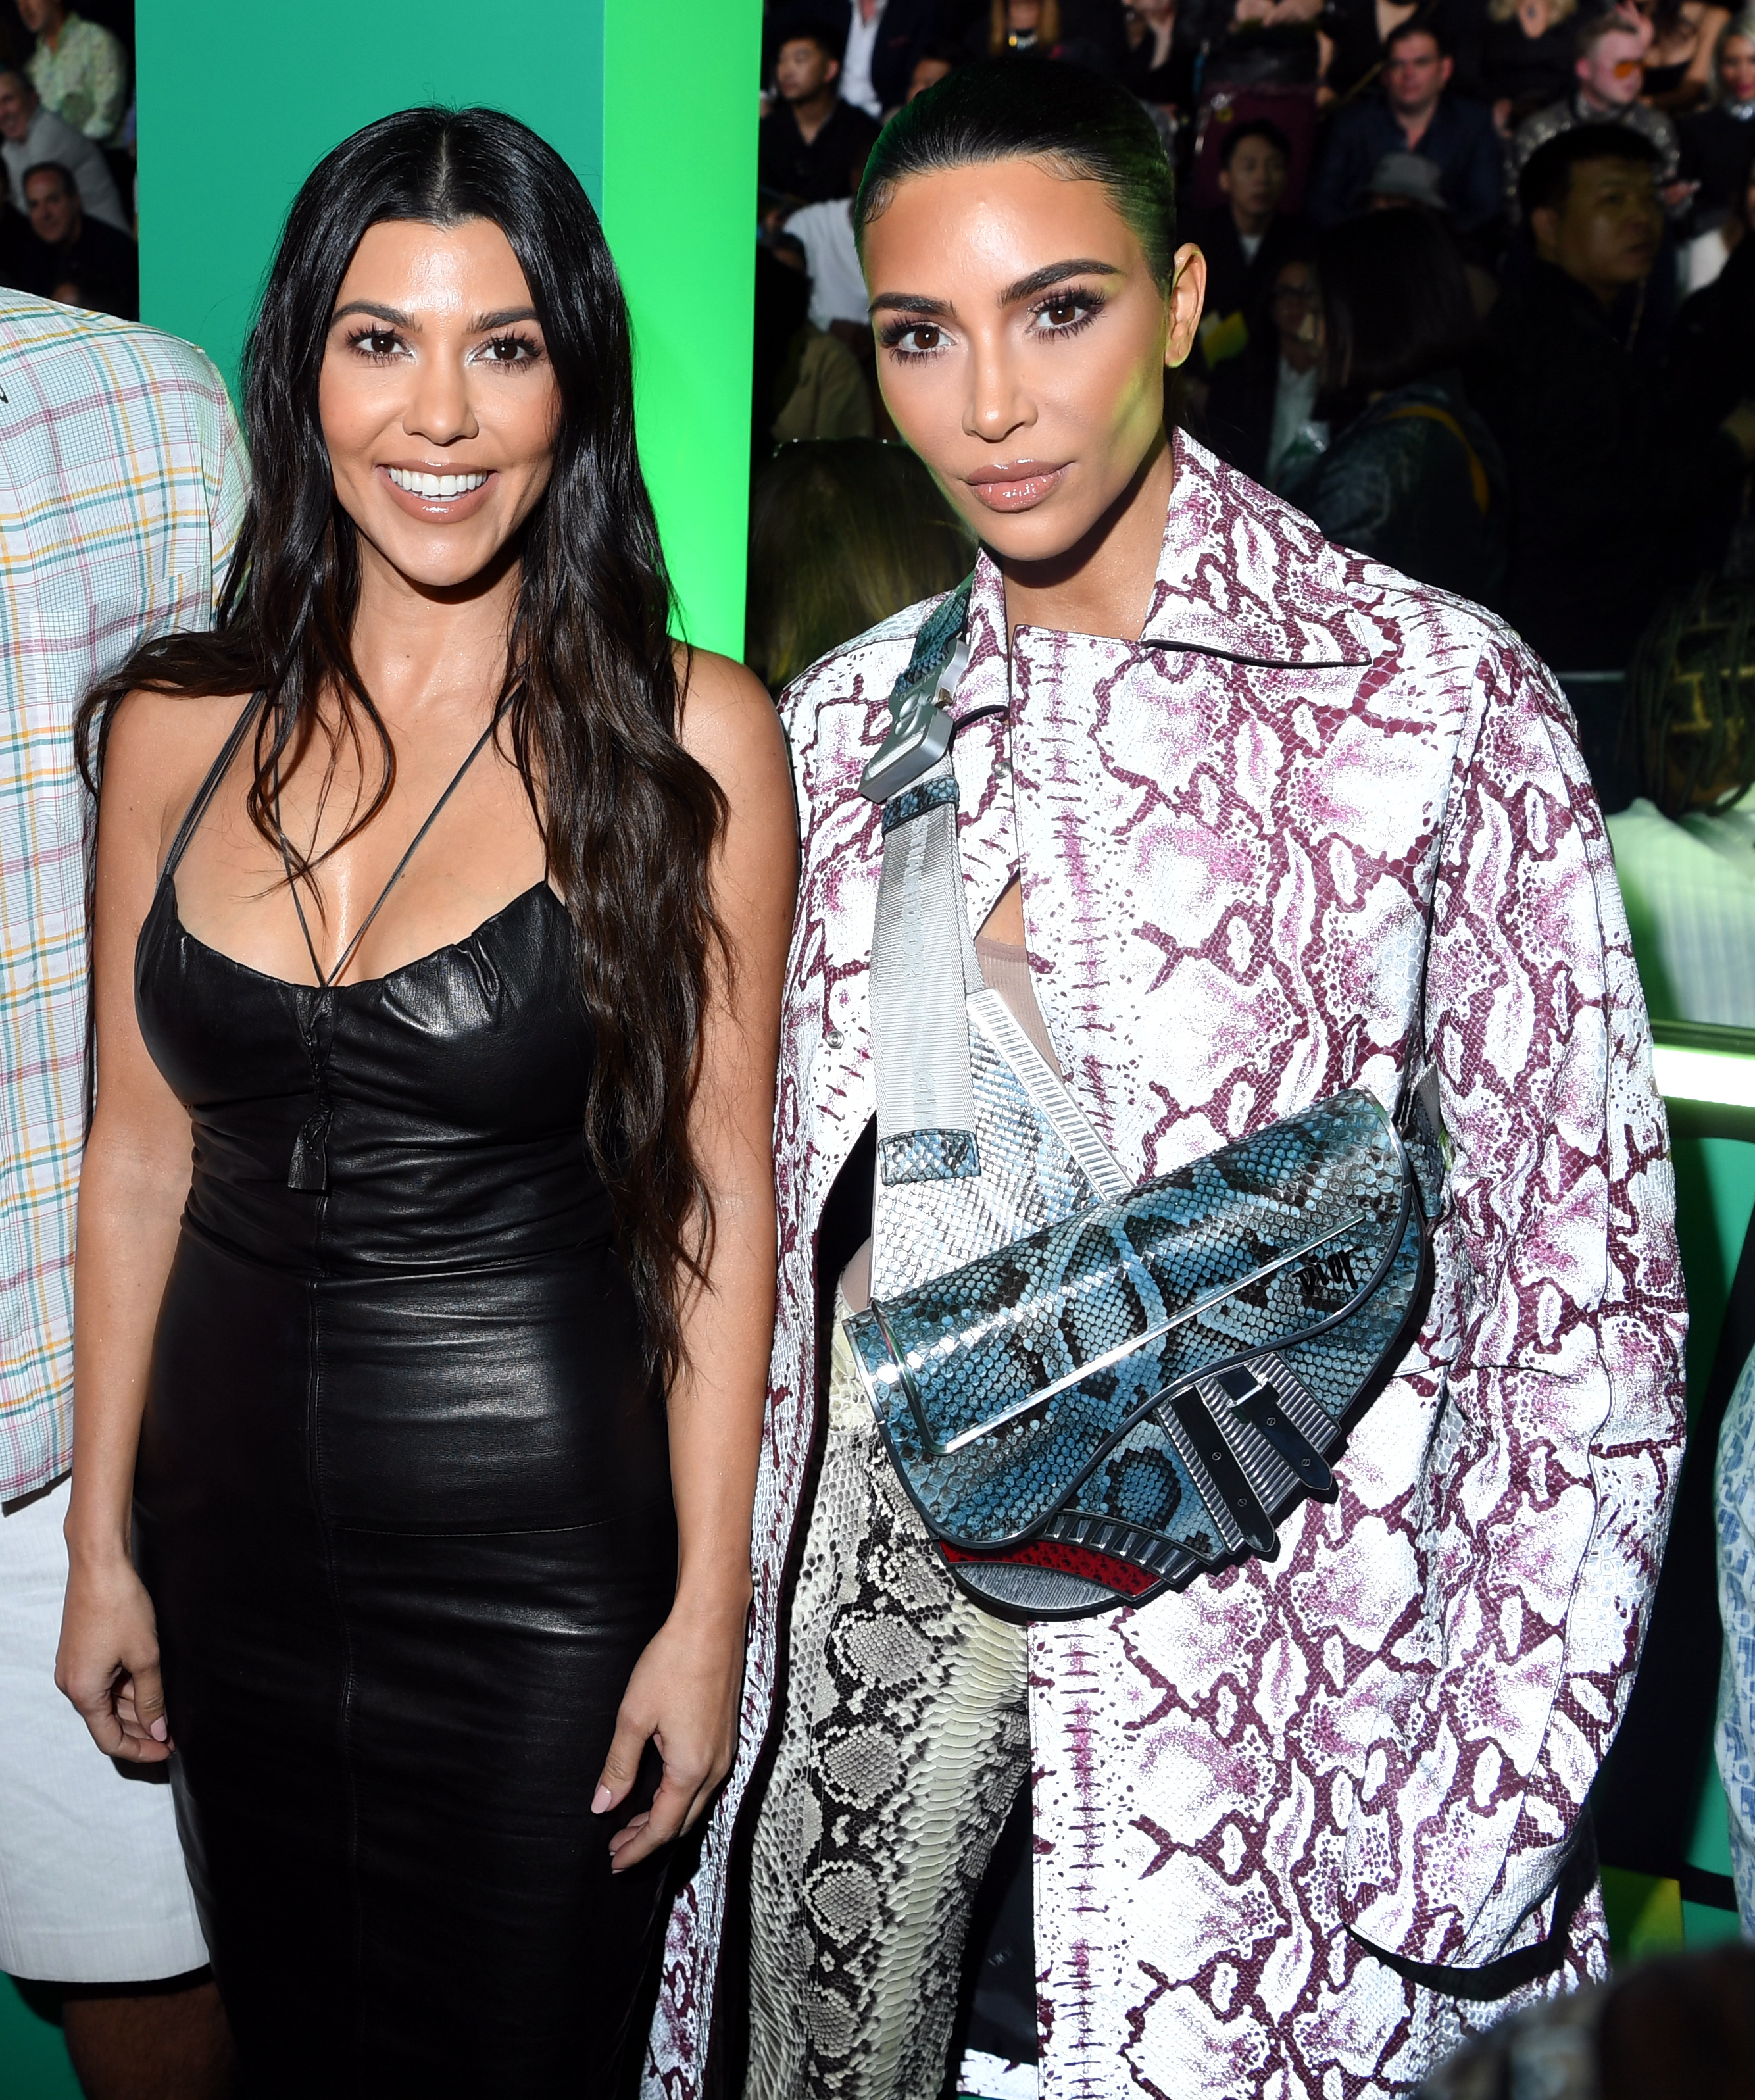 Kourtney and Kim Kardashian at the Dior Men's Show in Miami, Florida on December 3, 2019 | Source: Getty Images